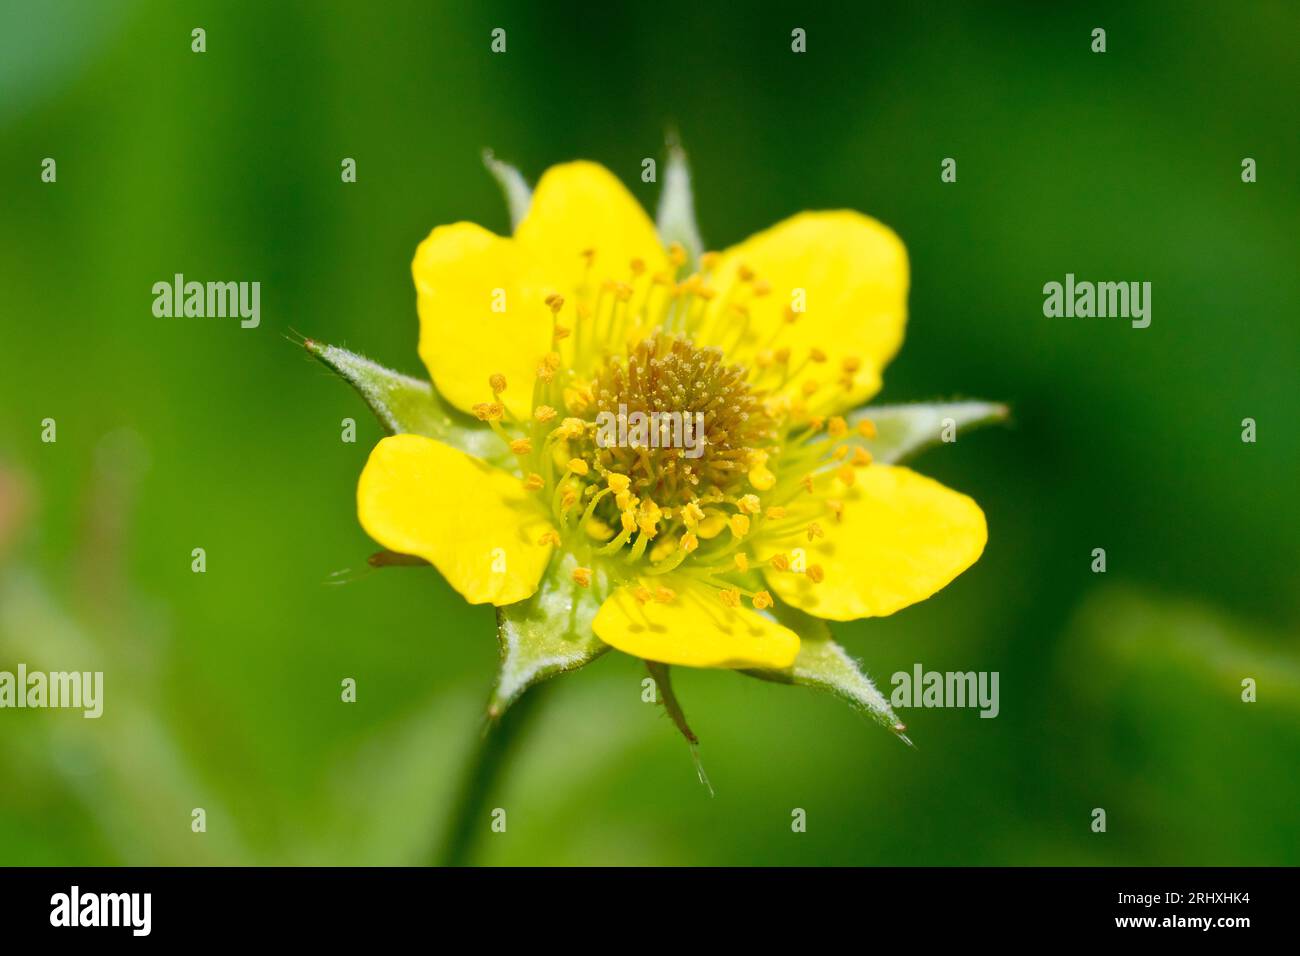 Wood Avens or Herb Bennet (geum urbanum), close up of a solitary yellow flower of the common woodland plant, isolated from the background. Stock Photo